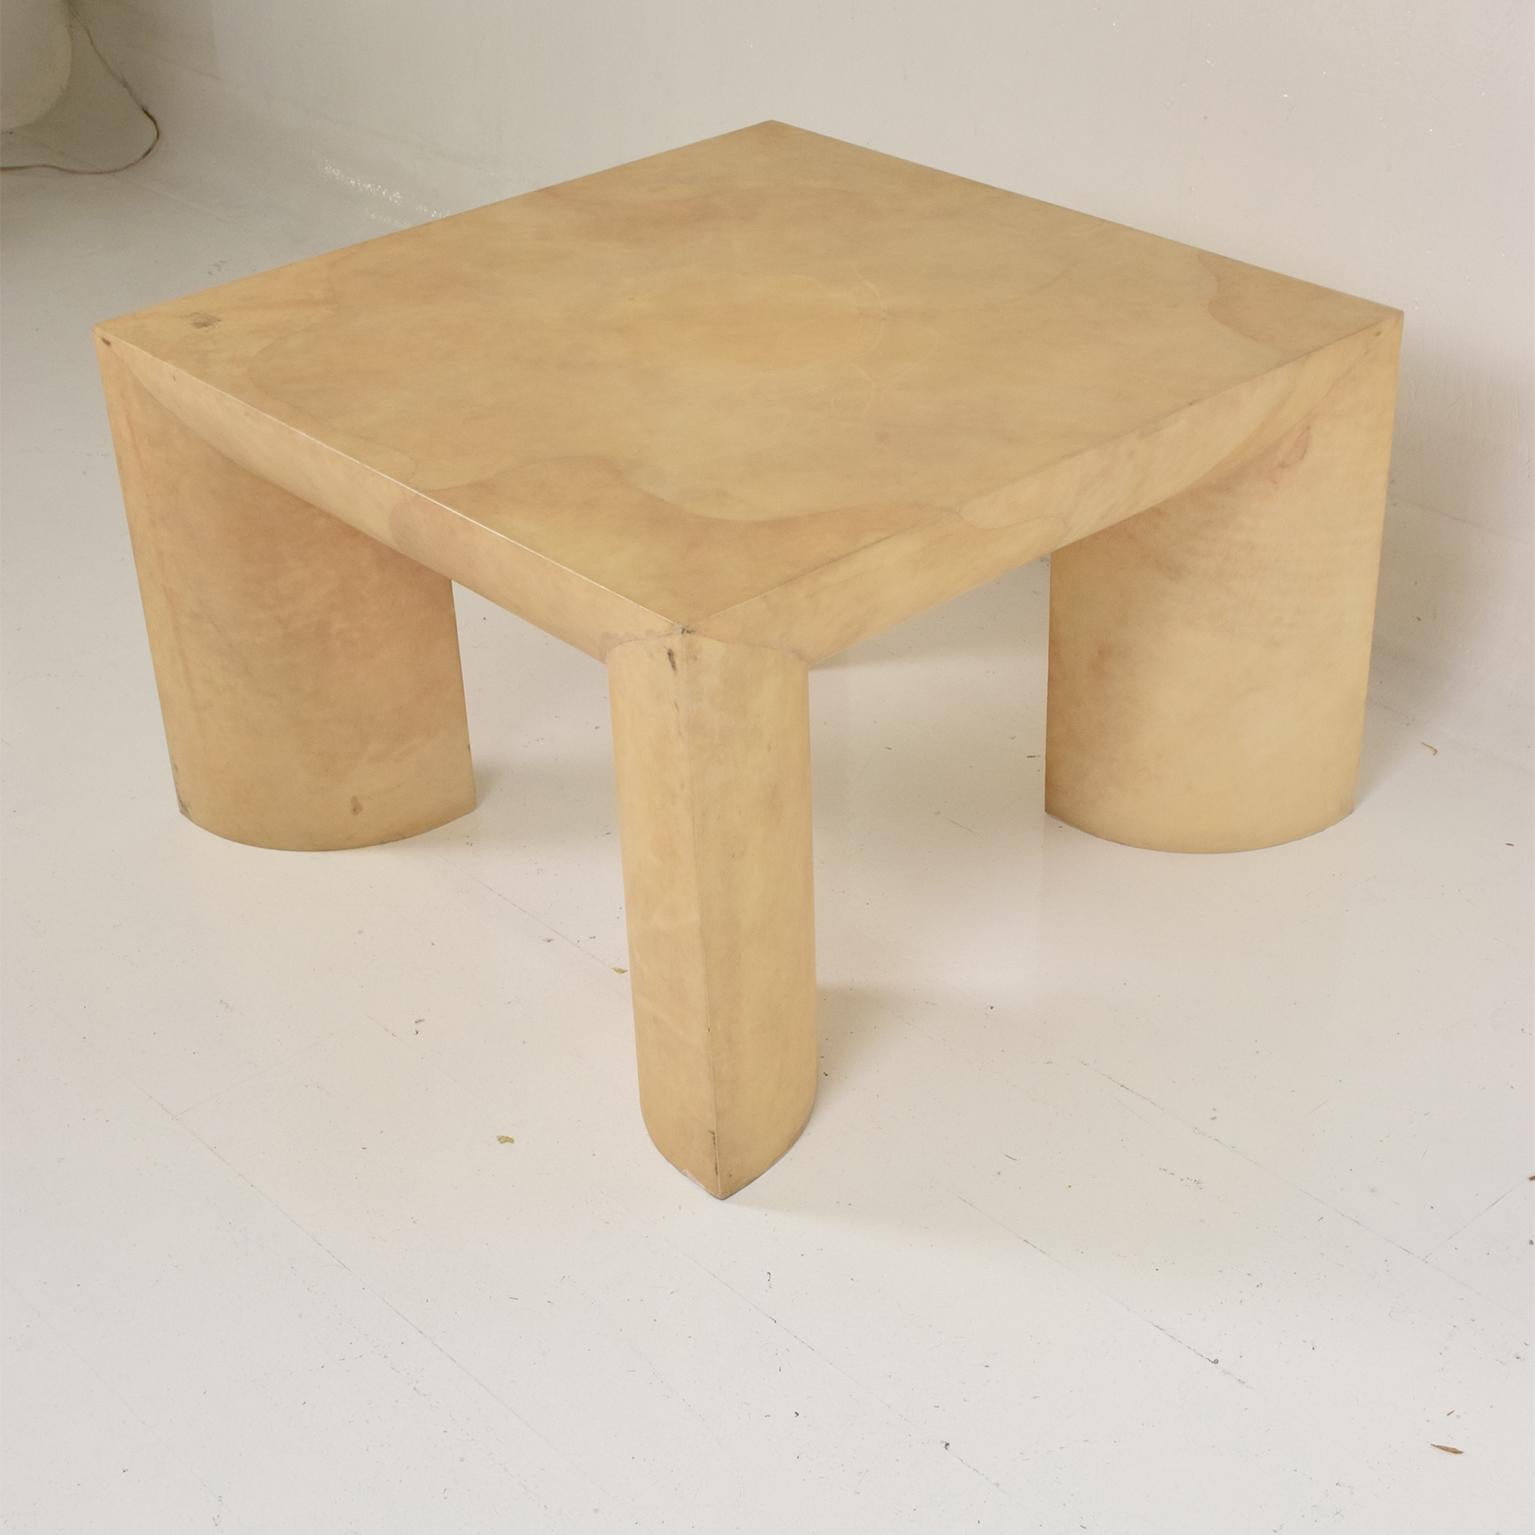 For your consideration, Mid-Century Modern goatskin coffee table, style of Karl Springer.
Dimensions: 19 3/4